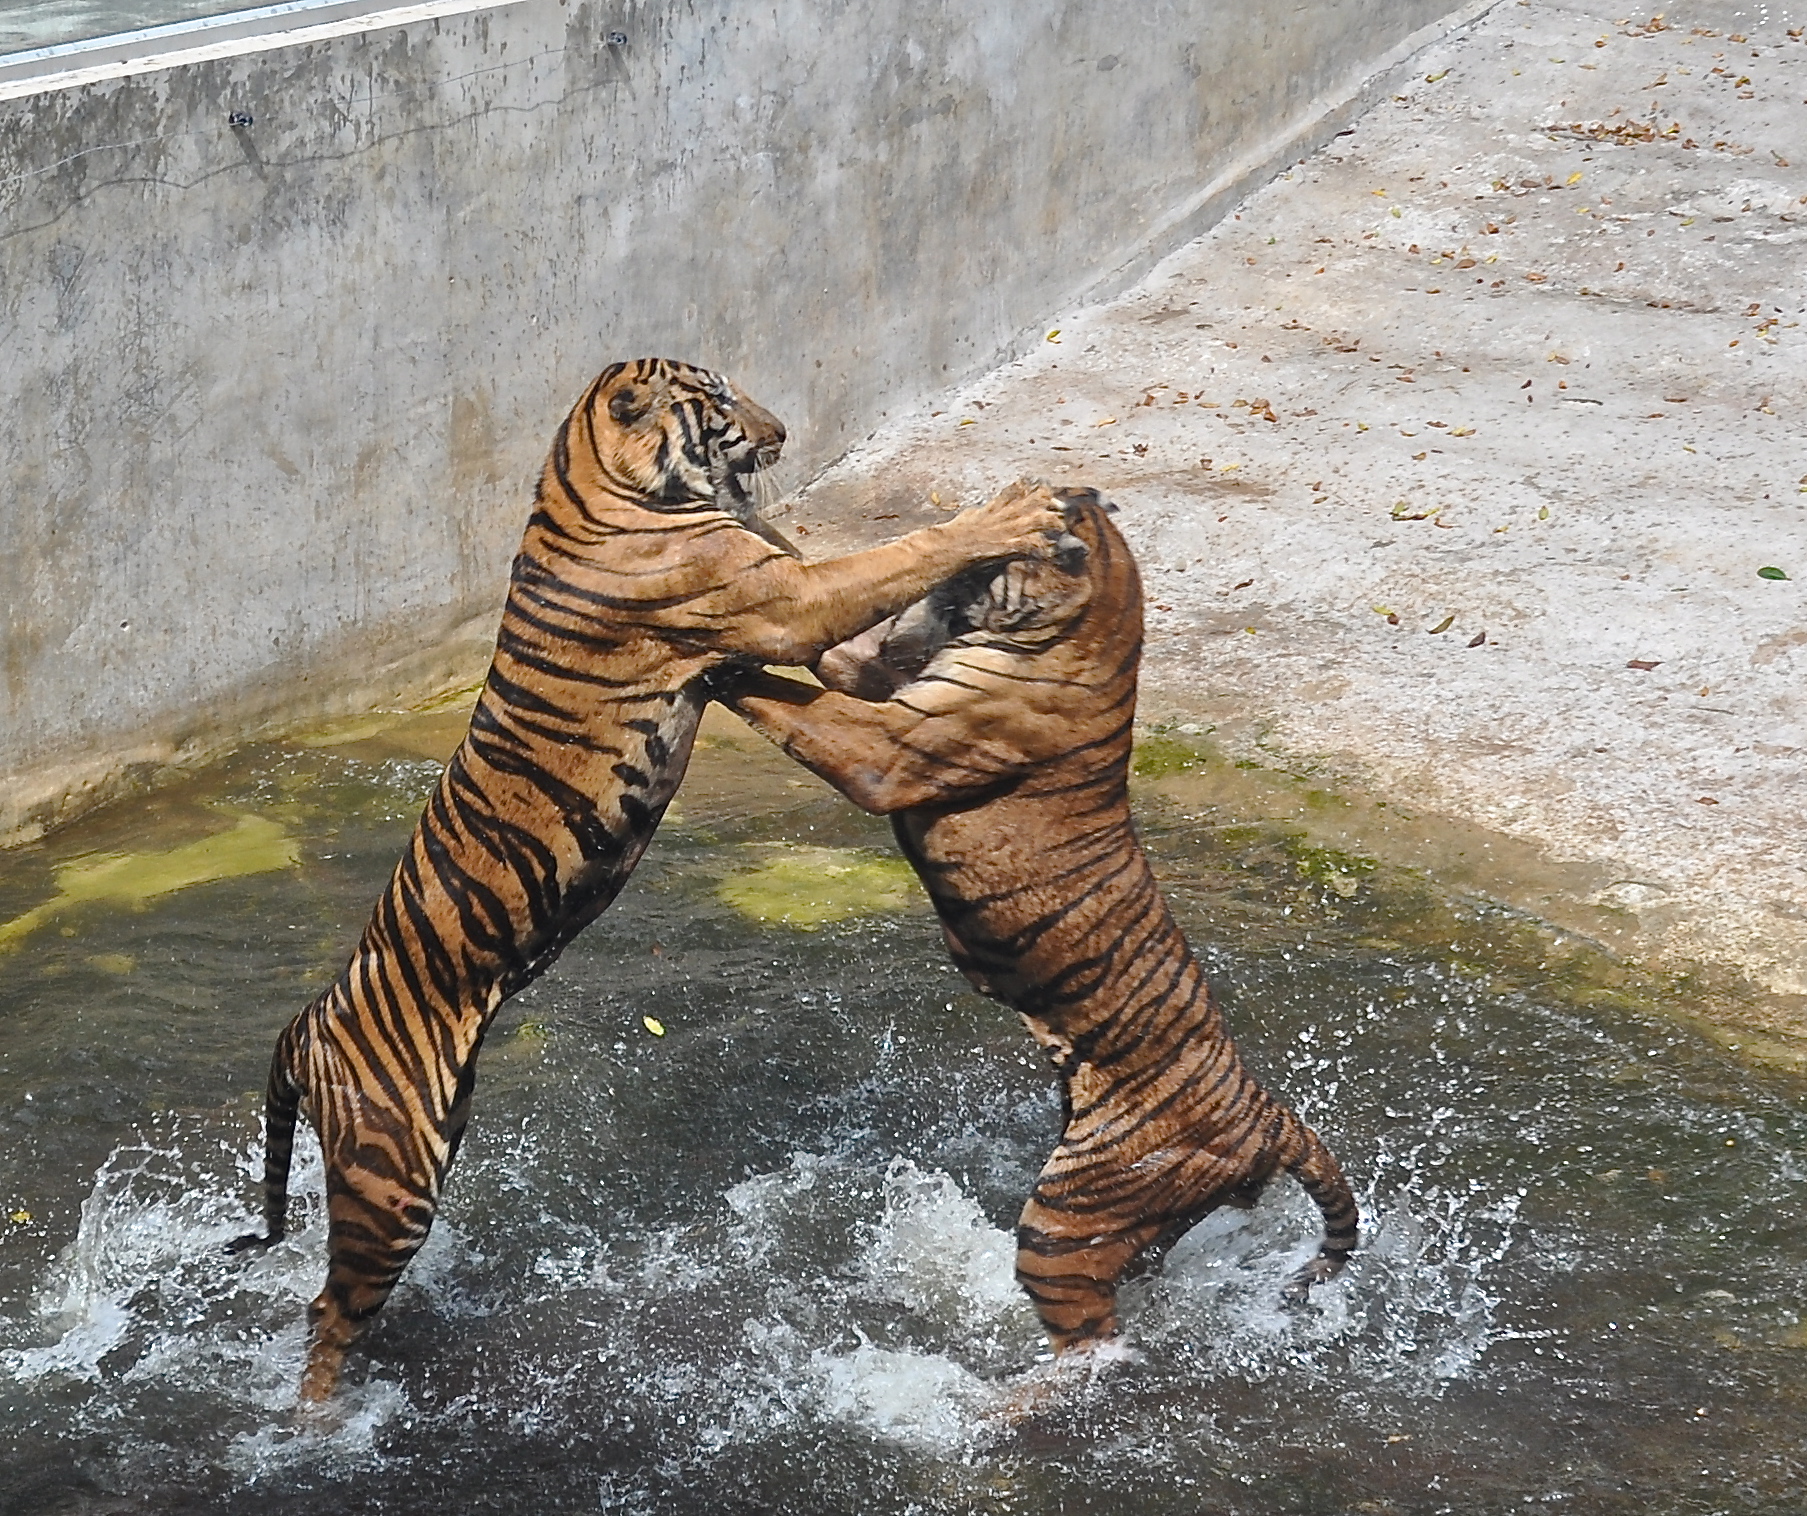 Male tigers fighting in Thailand tiger farm